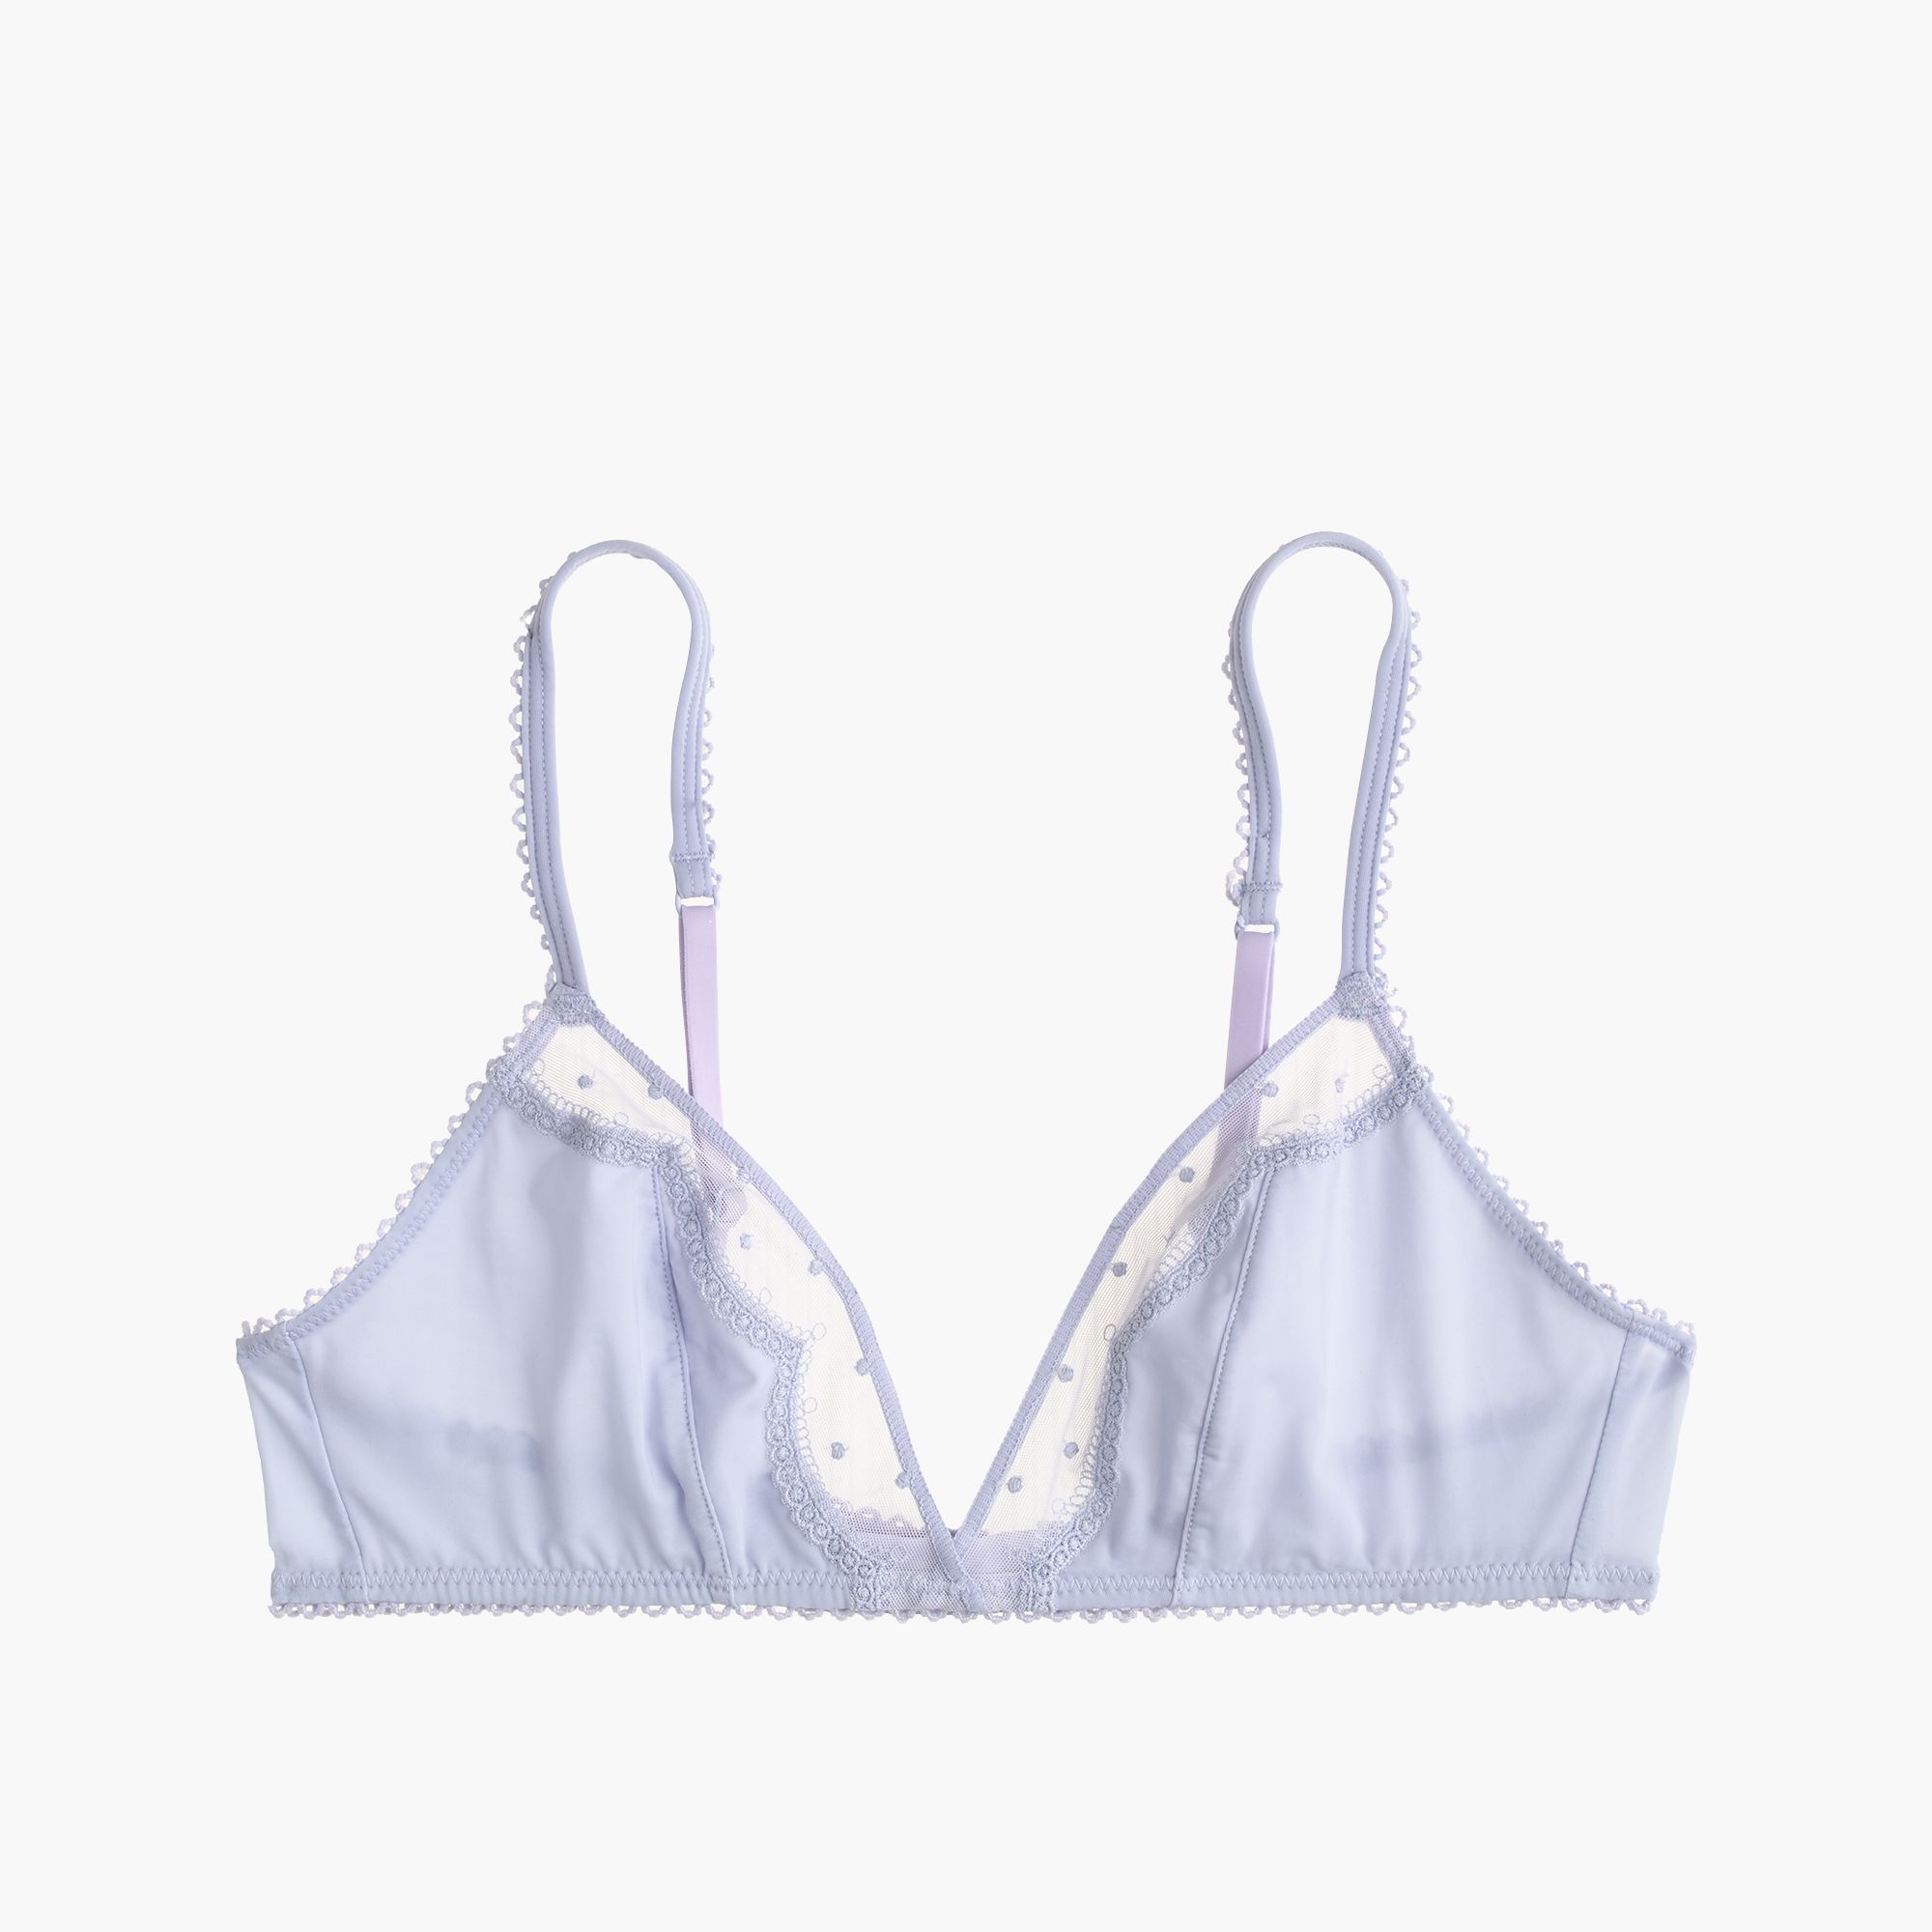 J.Crew's New Lingerie Collection Is Bralette Heaven